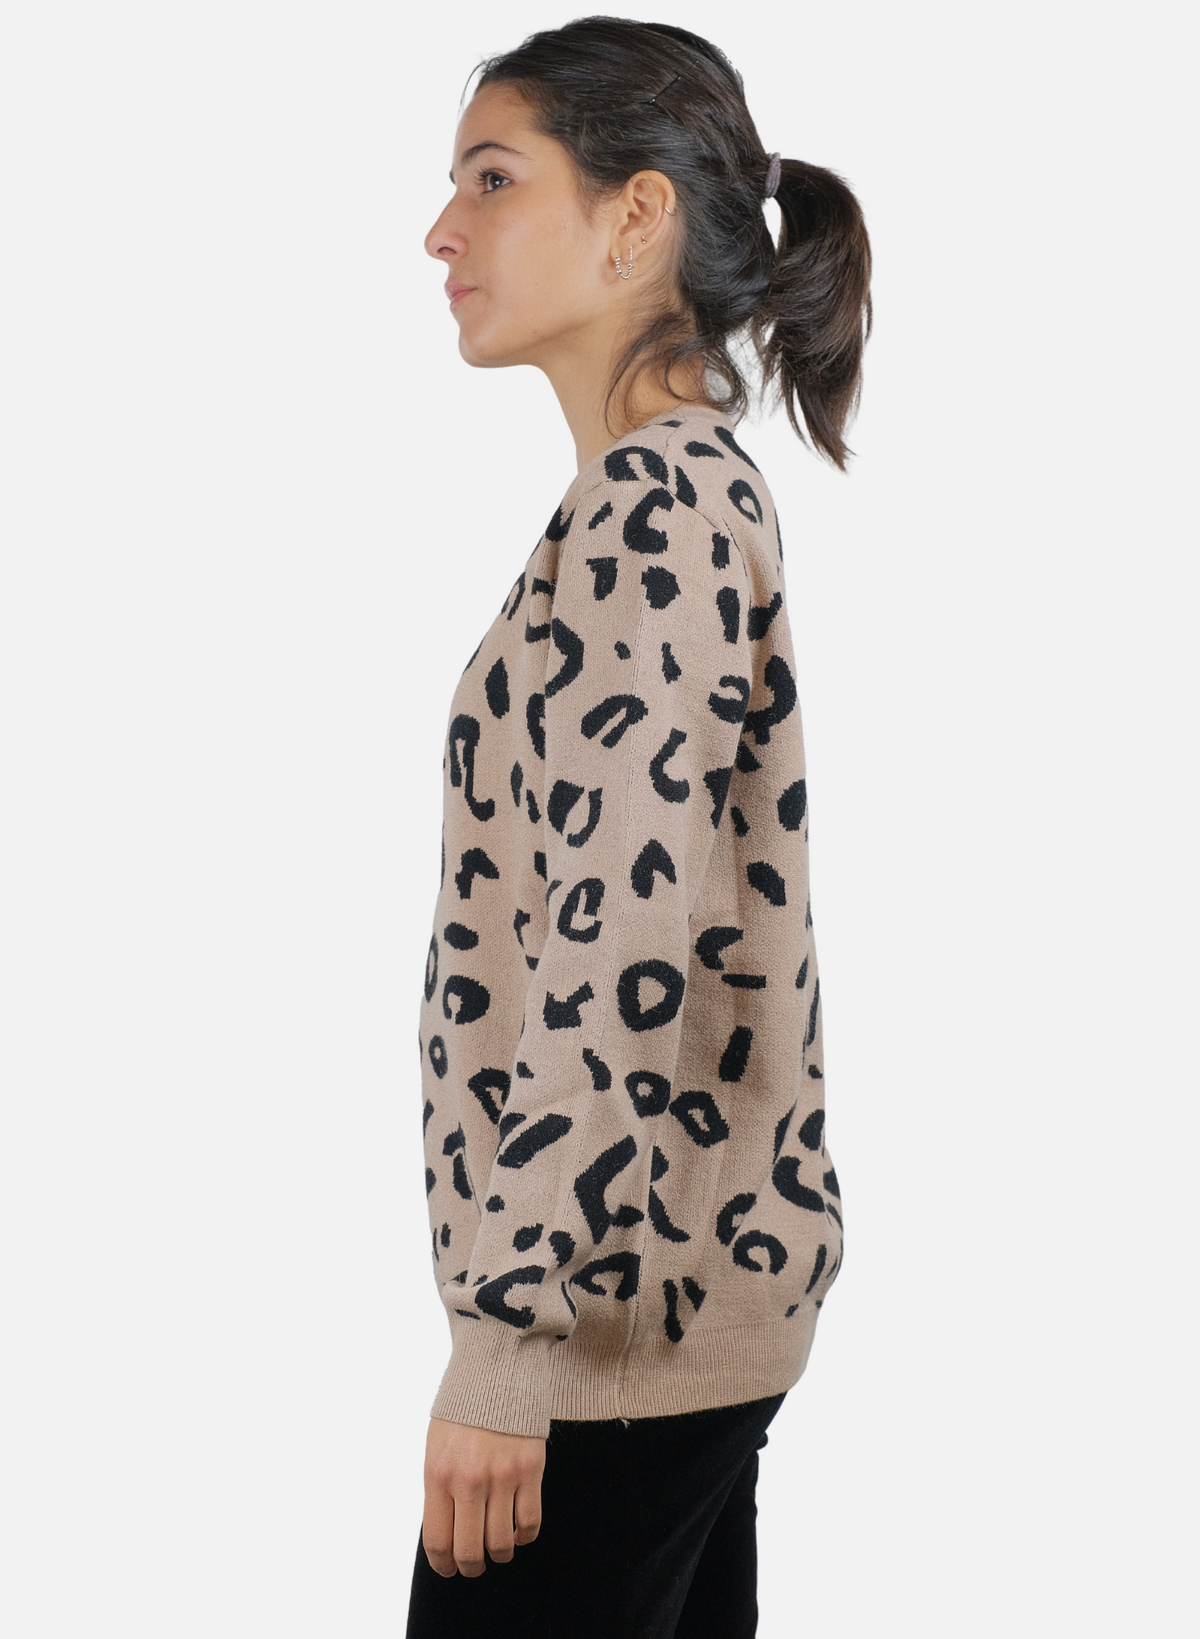 Women's sweater with leopard fantasy